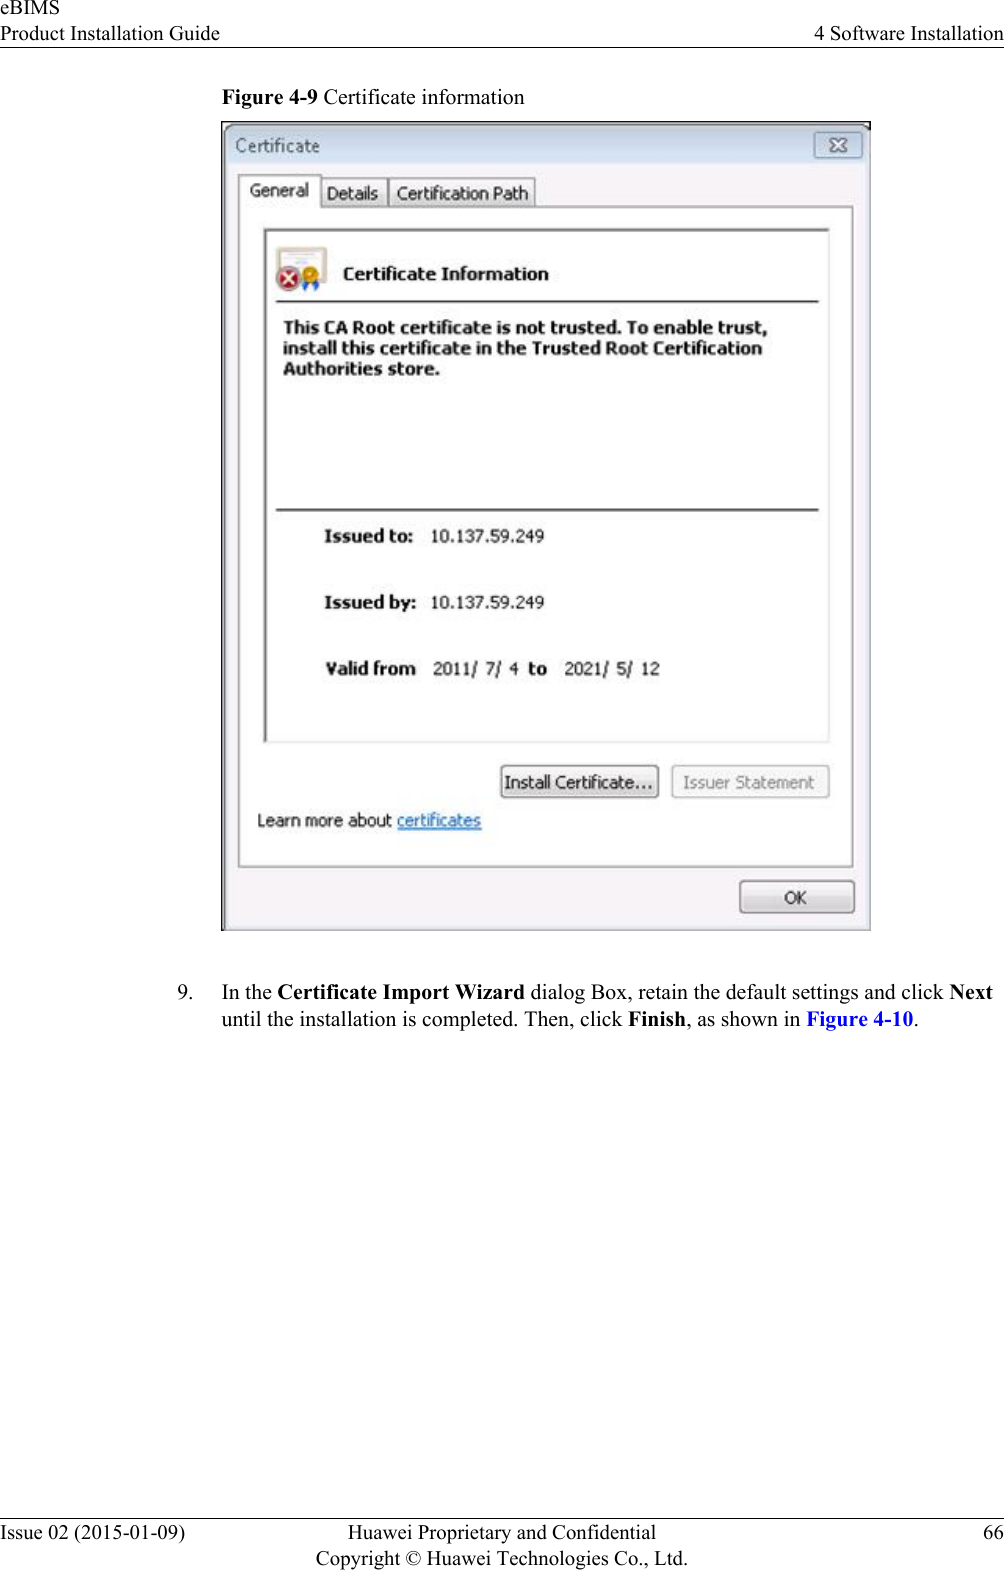 Figure 4-9 Certificate information9. In the Certificate Import Wizard dialog Box, retain the default settings and click Nextuntil the installation is completed. Then, click Finish, as shown in Figure 4-10.eBIMSProduct Installation Guide 4 Software InstallationIssue 02 (2015-01-09) Huawei Proprietary and ConfidentialCopyright © Huawei Technologies Co., Ltd.66